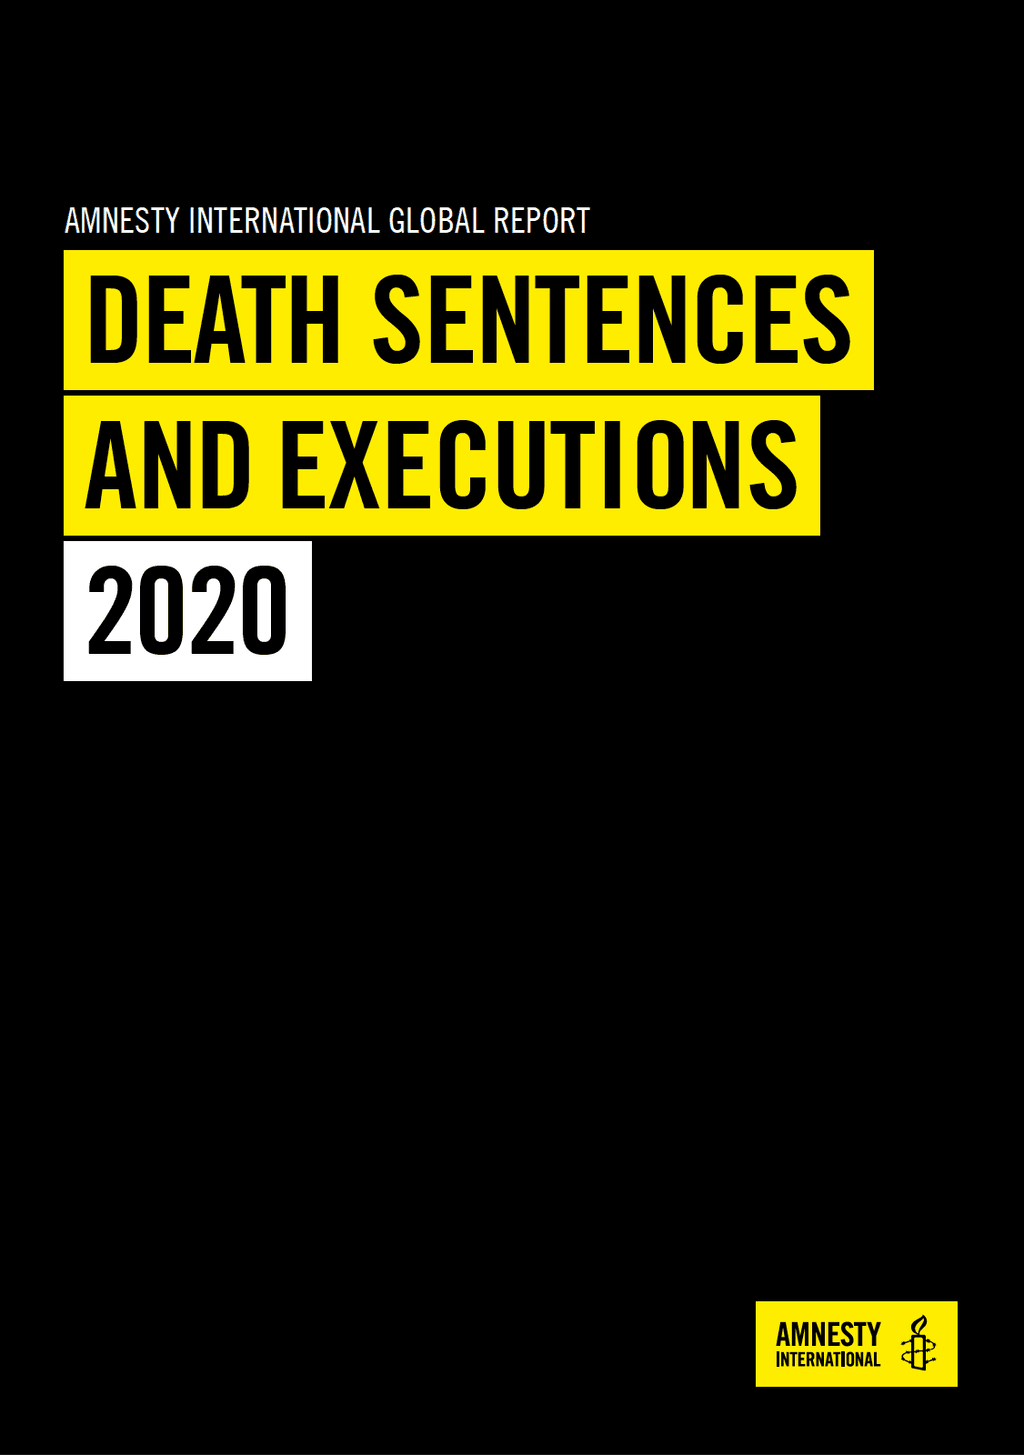 Amnesty International Global Report: Executions Worldwide Fewest in a Decade, Death Sentences Fall More Than One Third in 2020